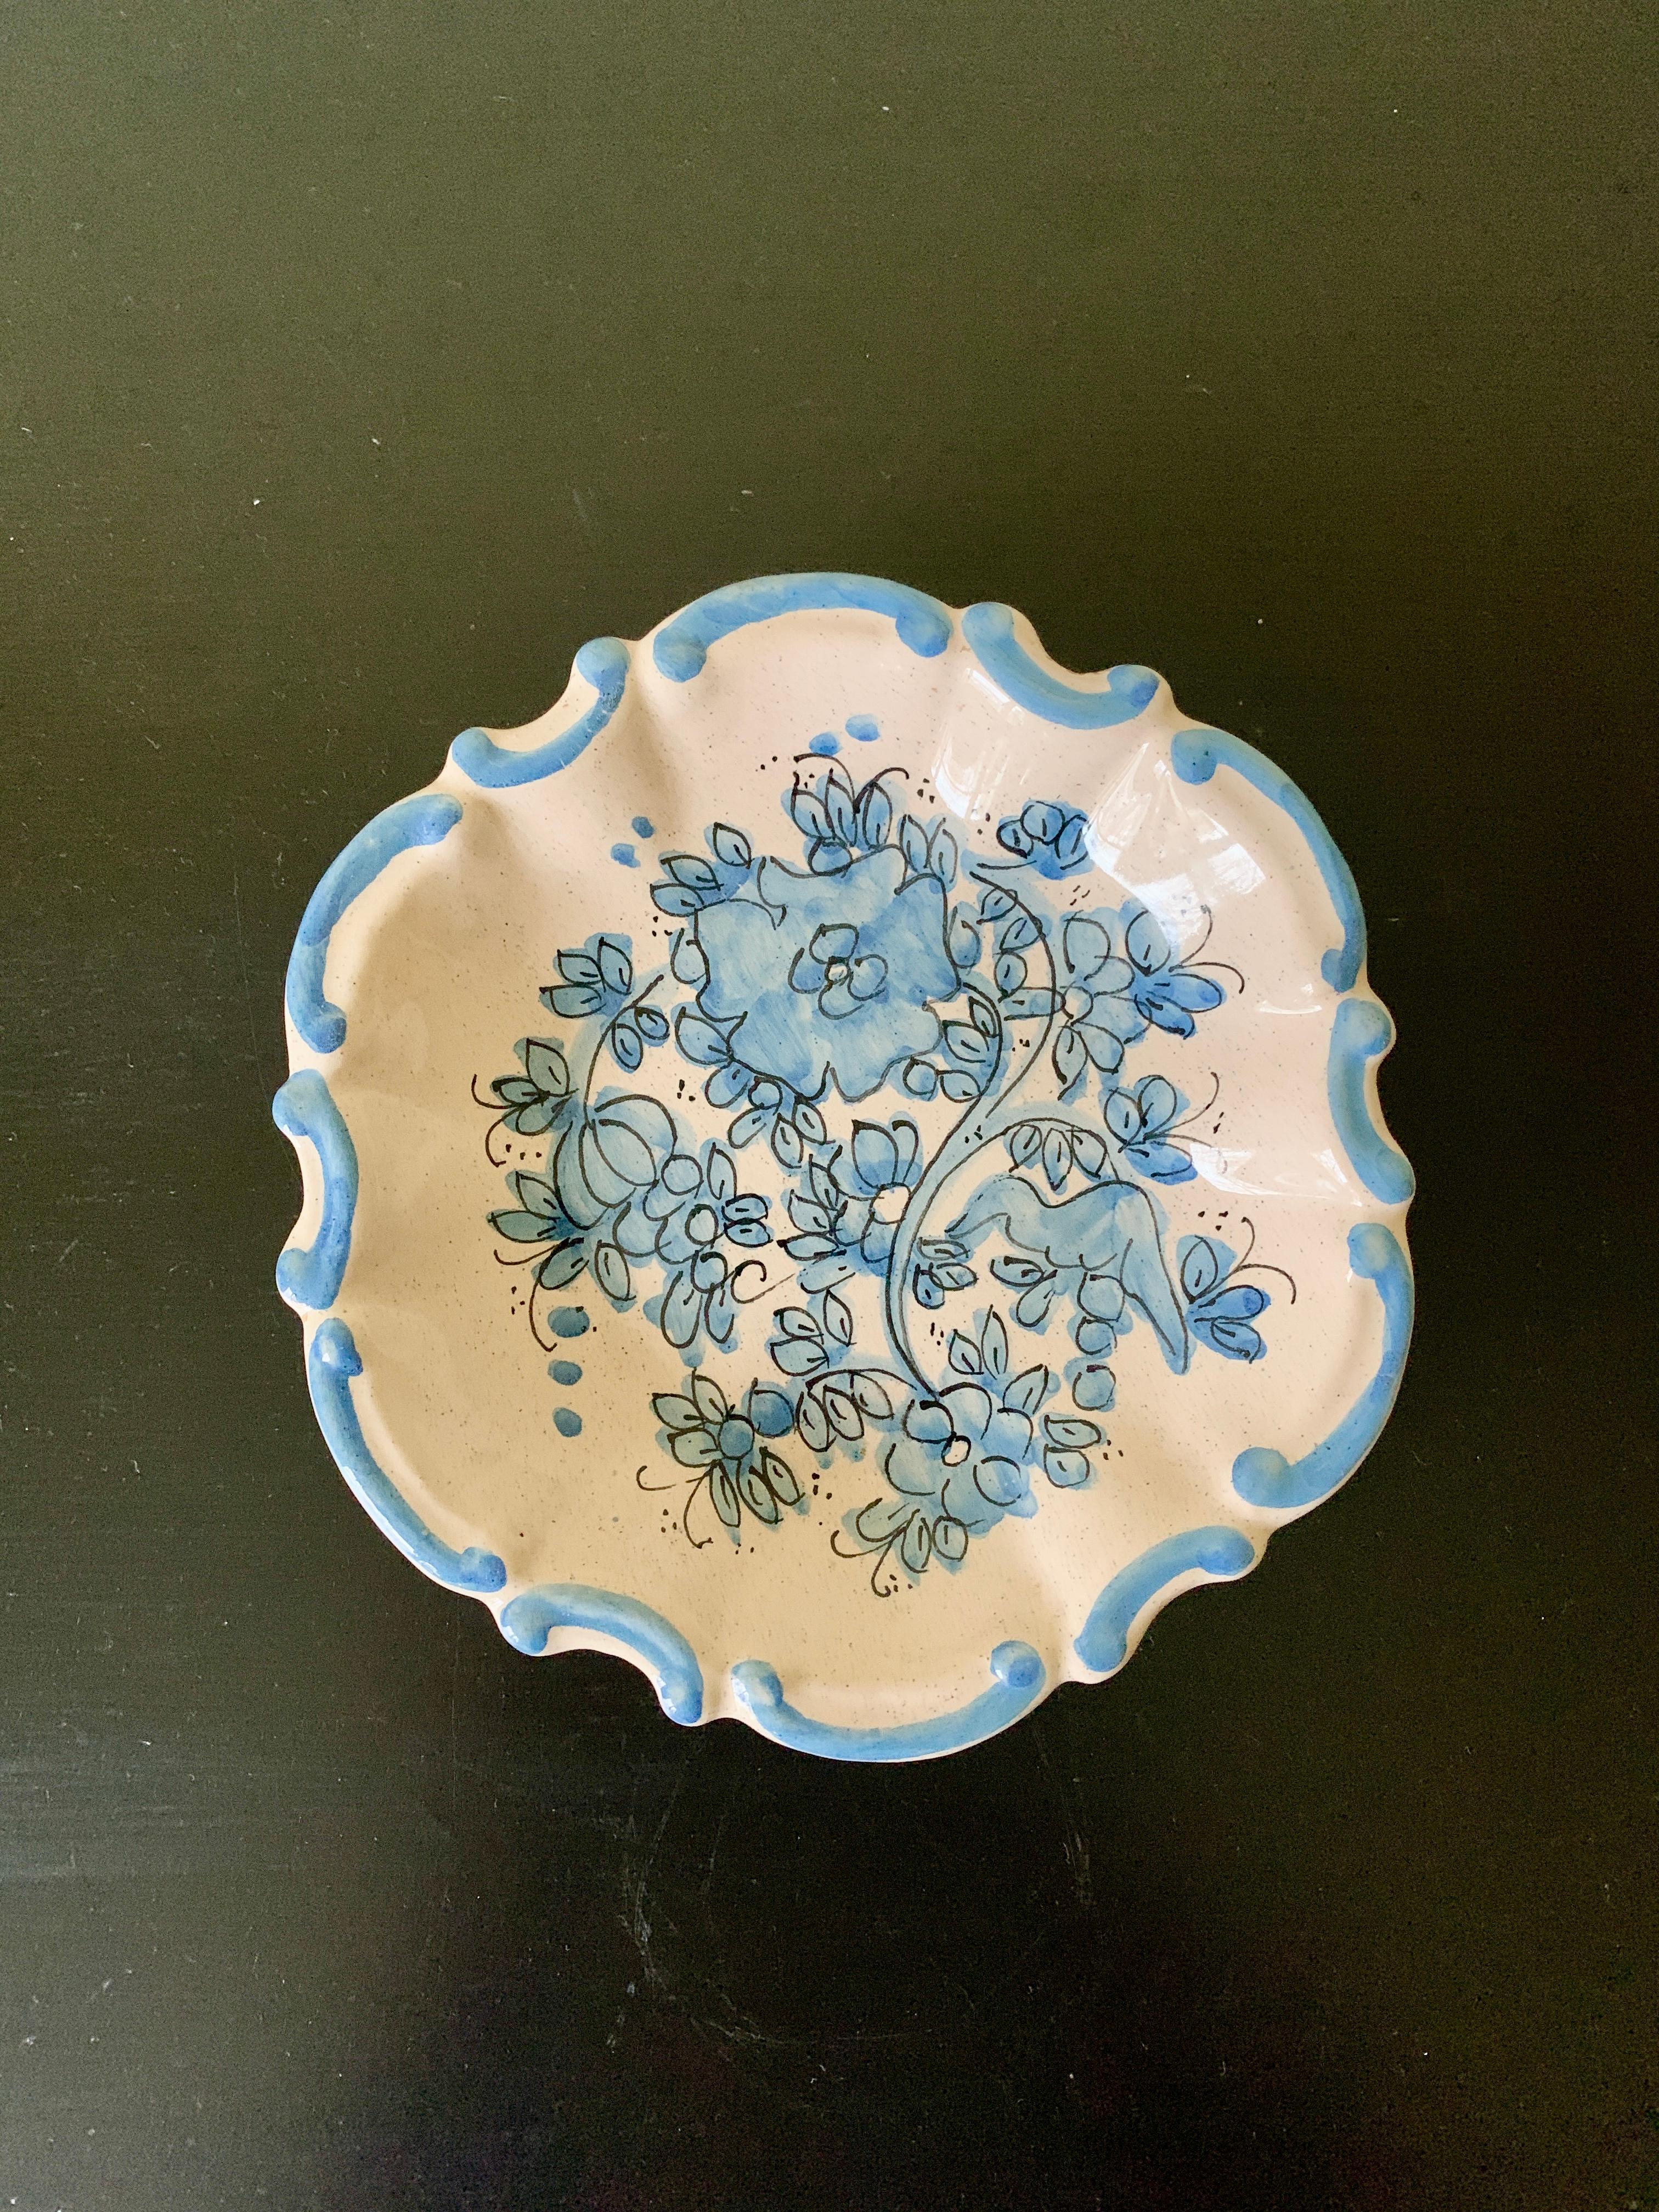 A beautiful French Provincial style hand painted blue and cream faience pottery wall plate featuring floral designs.

By Marcucci for Deruta

Italy, Late-20th Century

Measures: 5.25